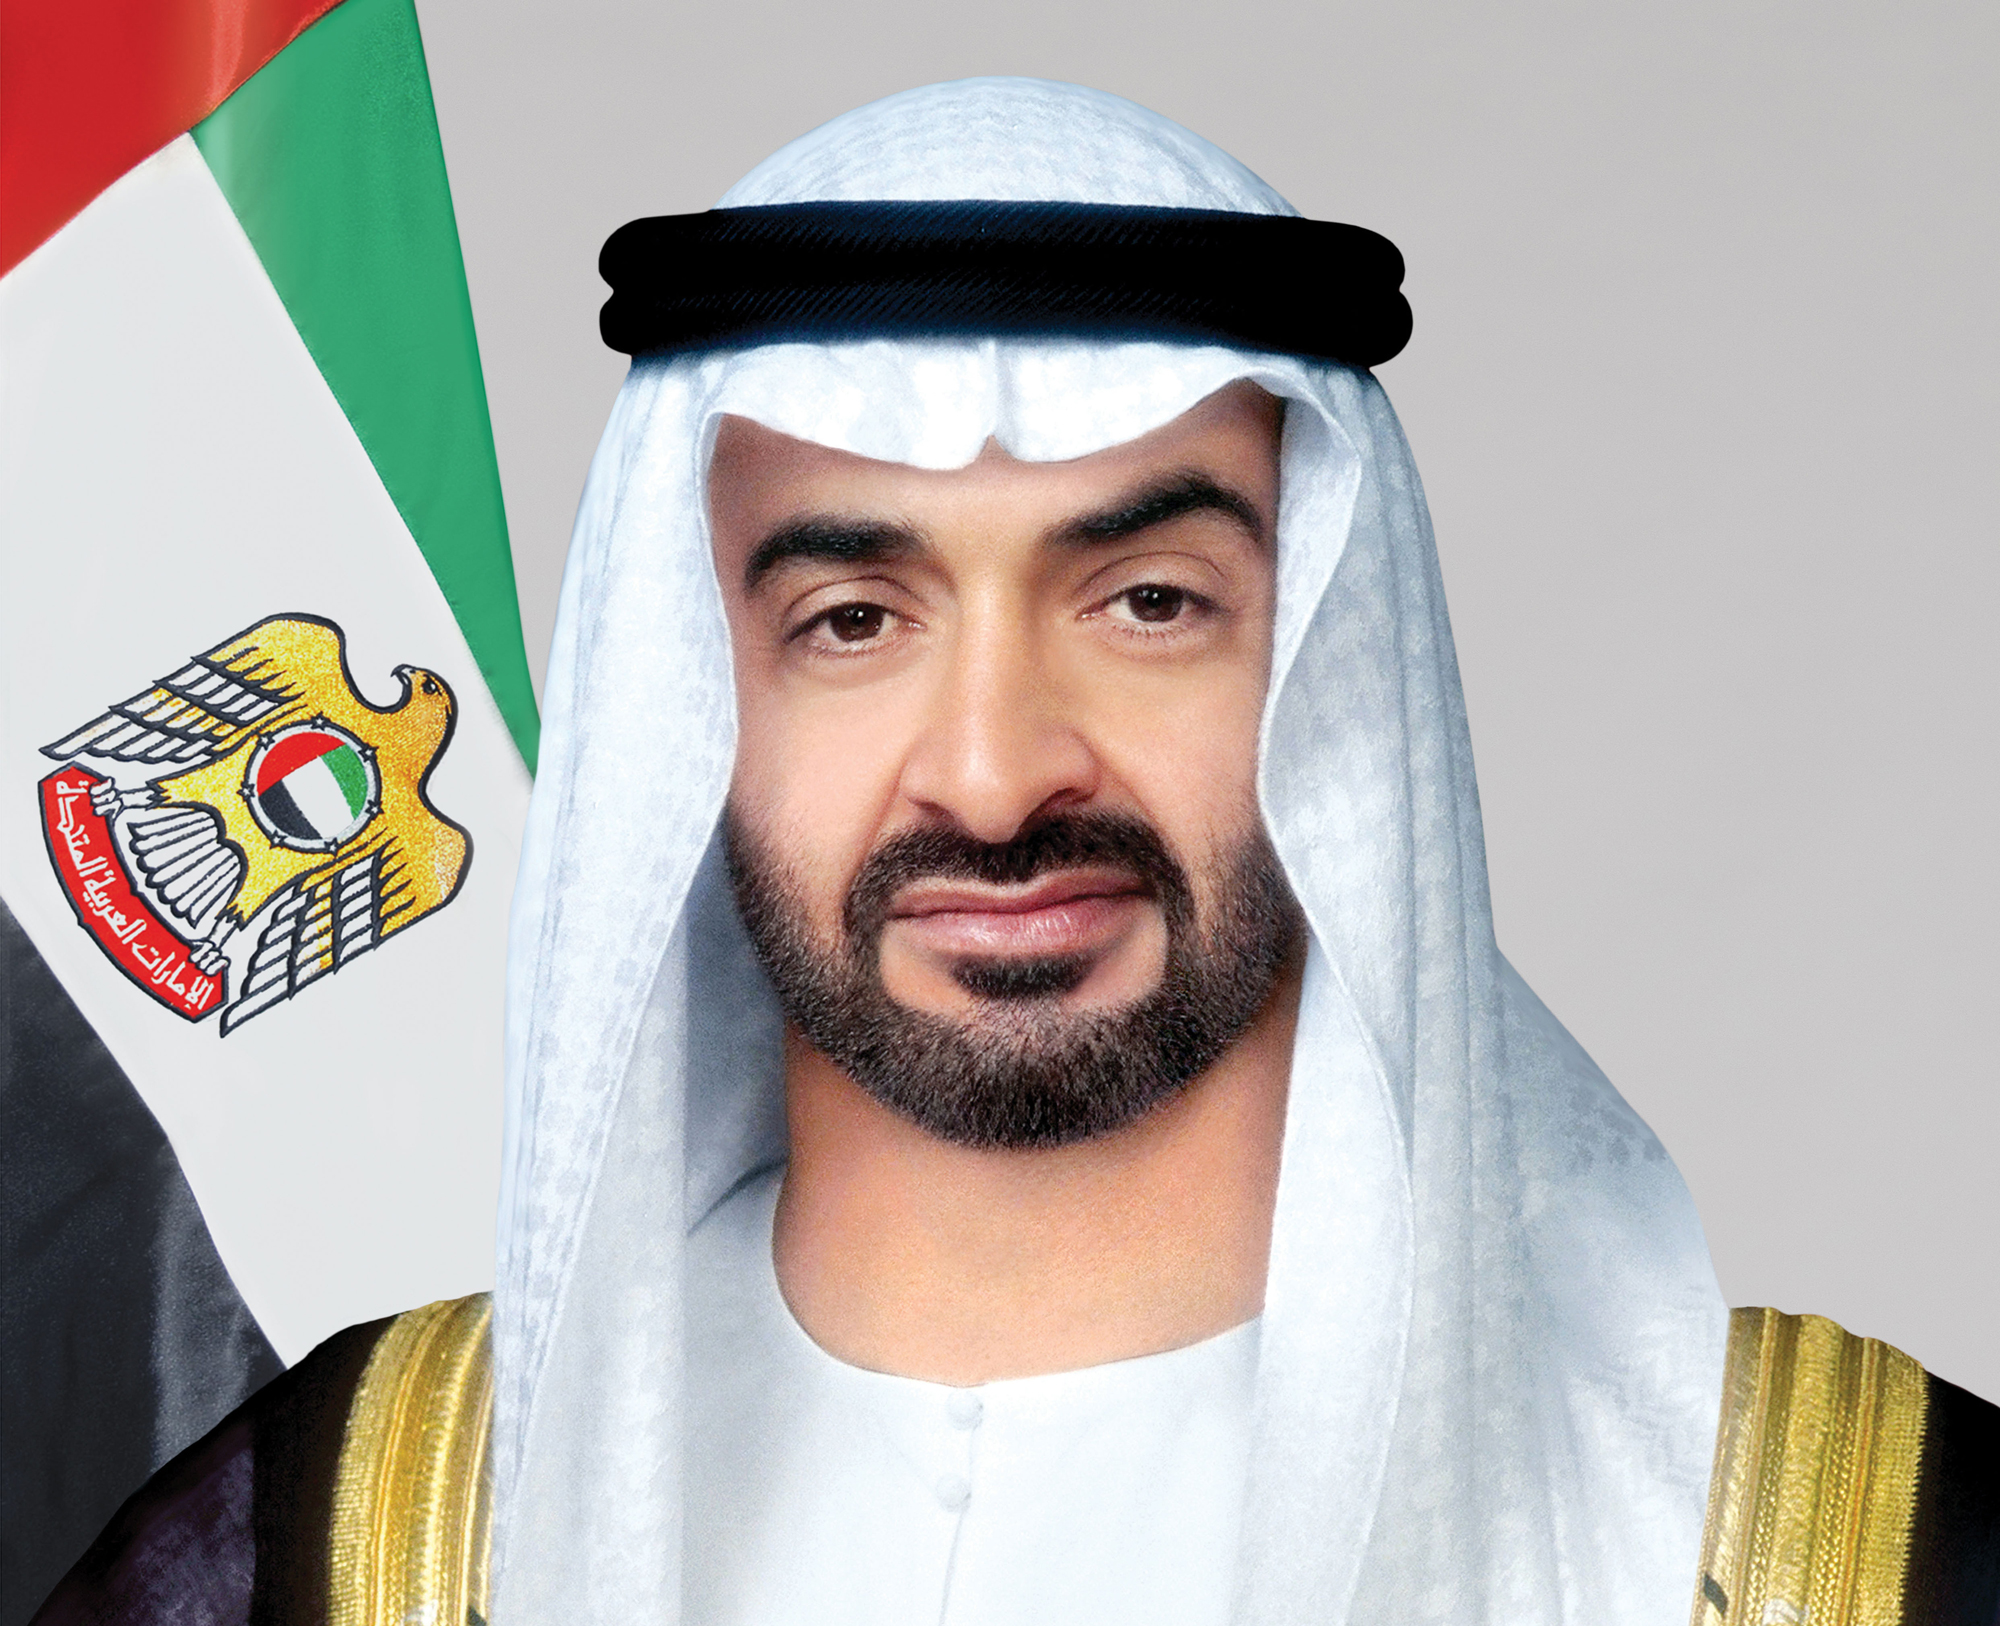 Photo: UAE President: Safety and security of citizens and residents is UAE government’s top priority